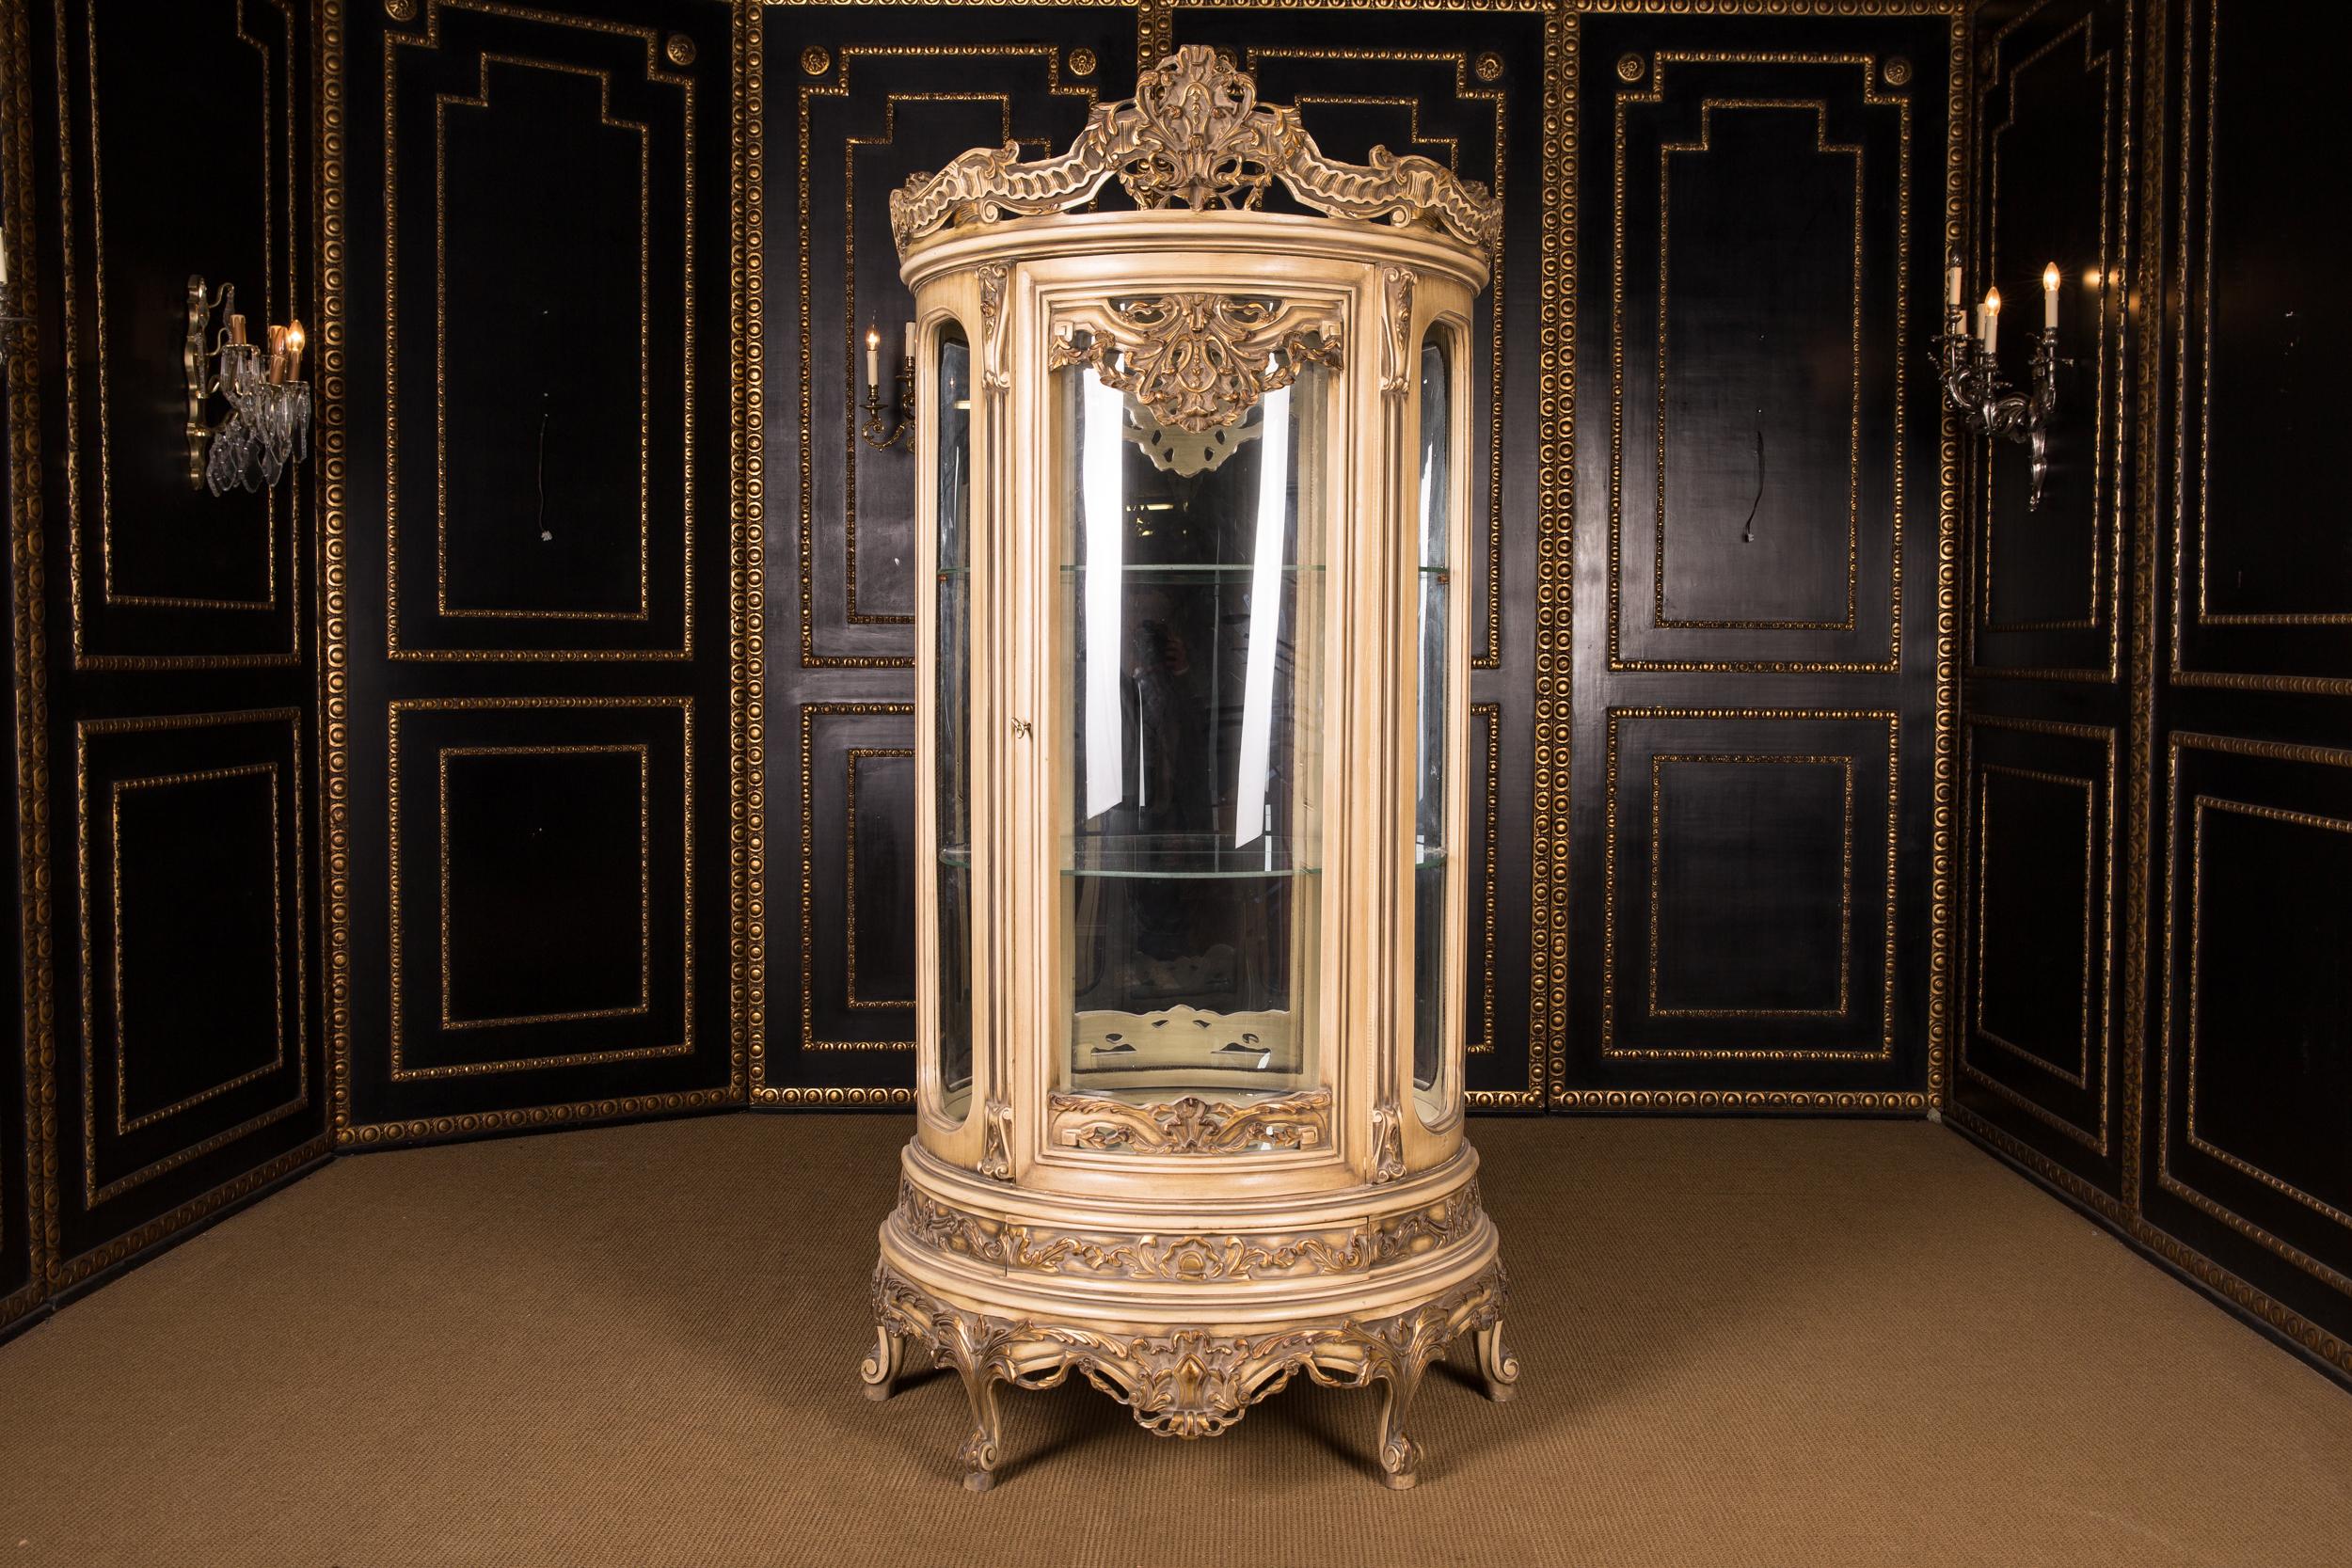 Massive, finely carved beech wood, colored and gilt gilded. High-rectangular, half-round and one-door cambered body, glazed from three sides. On curved feet one-door scalloped frame. Back wall mirrored three glass shelves. Carcass-shaped framing